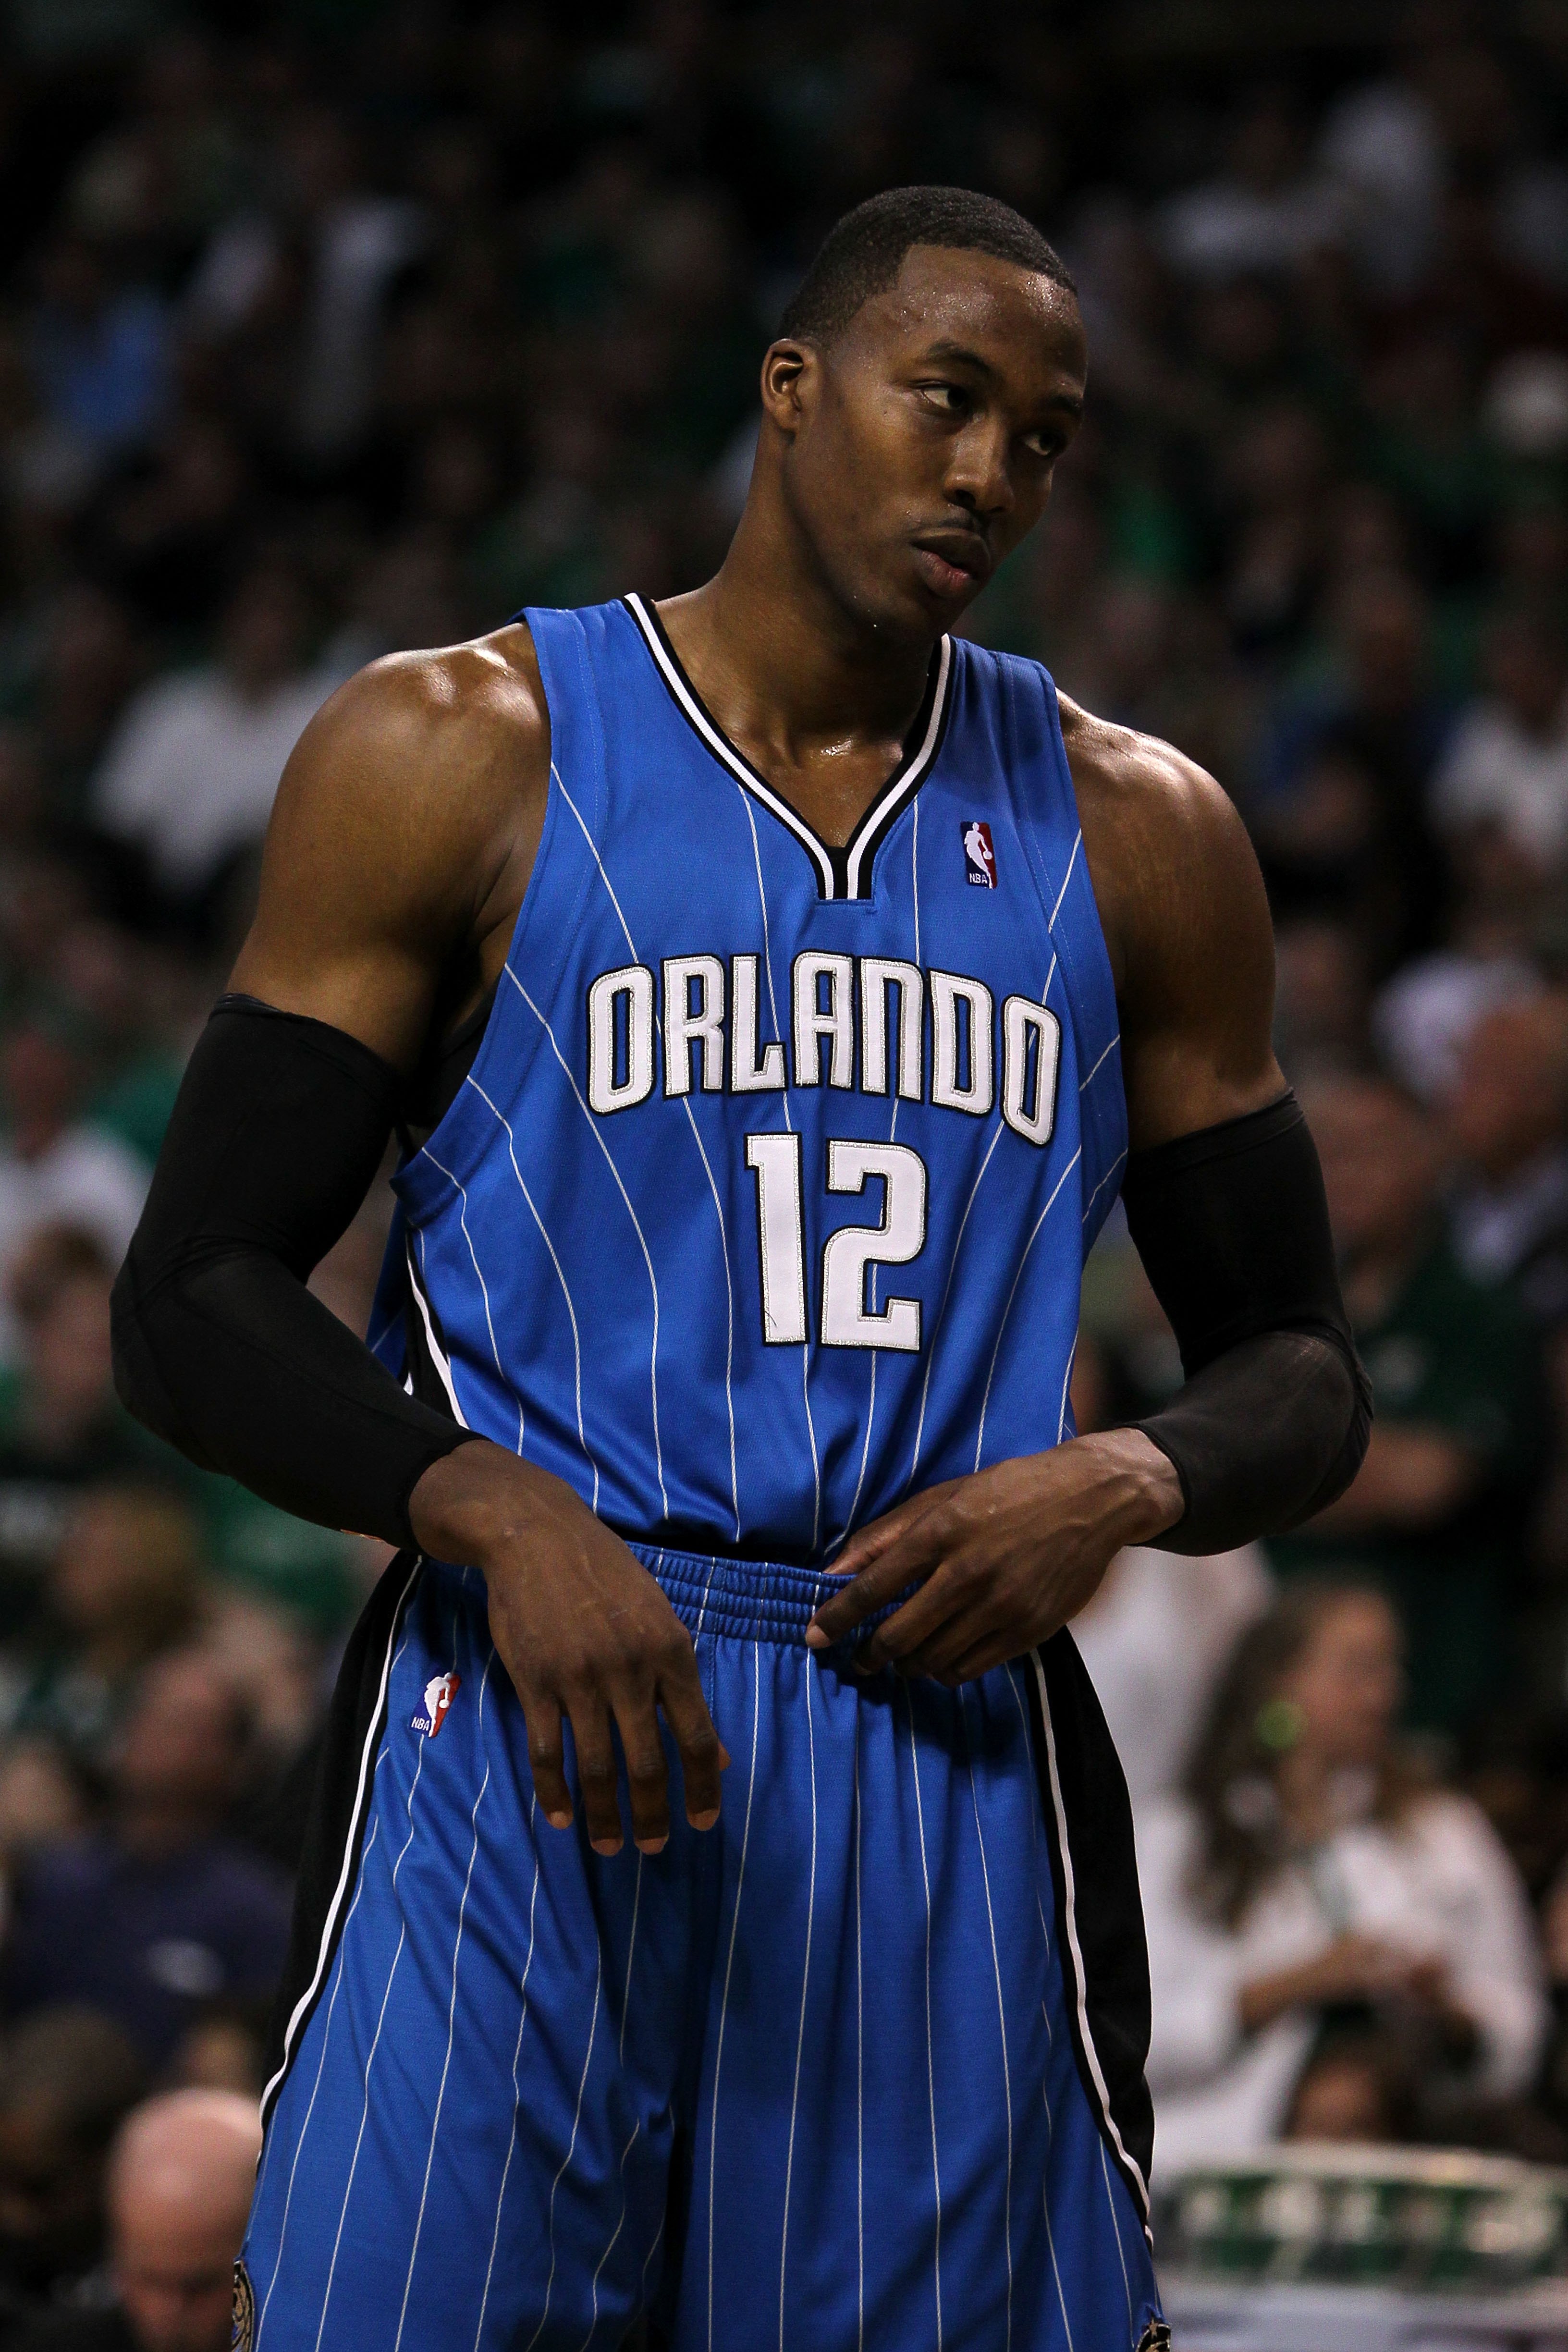 BOSTON - MAY 28:  Dwight Howard of the Orlando Magic looks on against the Boston Celtics in Game Six of the Eastern Conference Finals during the 2010 NBA Playoffs at TD Garden on May 28, 2010 in Boston, Massachusetts.  NOTE TO USER: User expressly acknowl